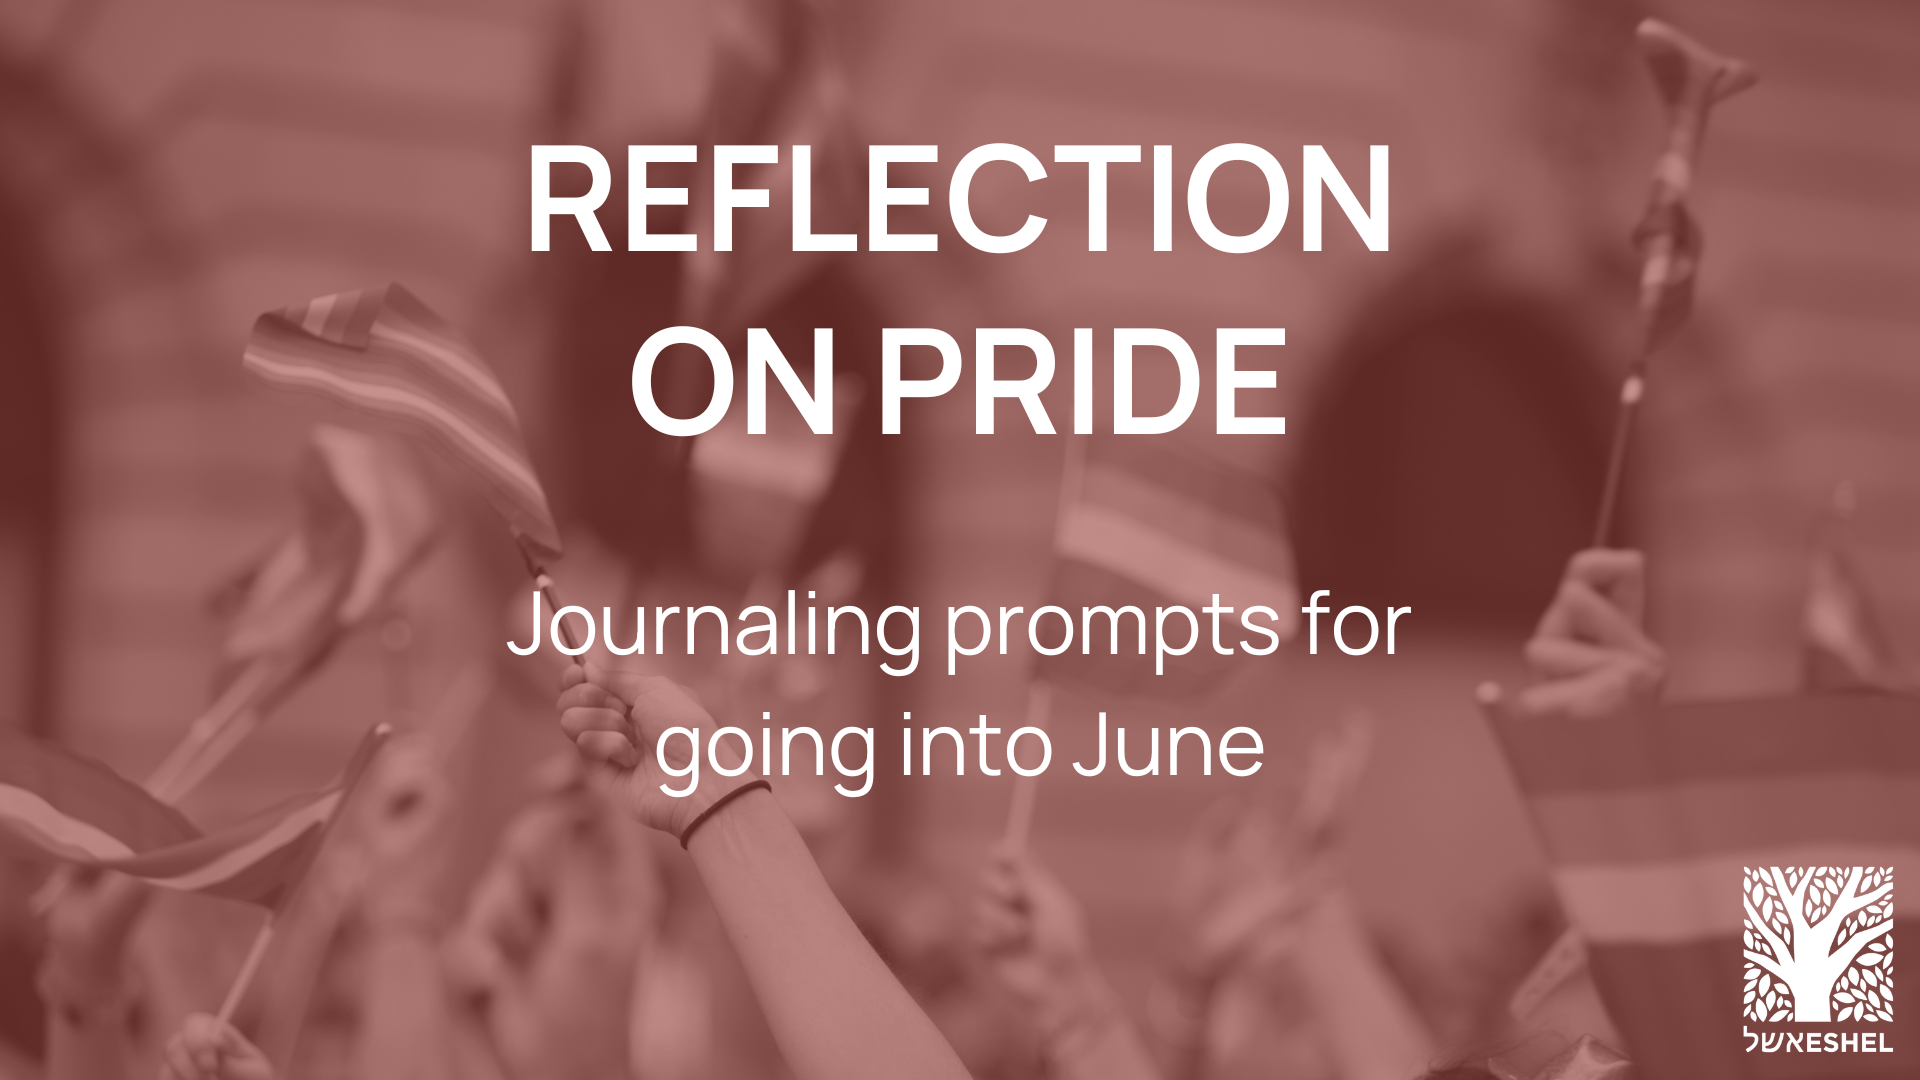 reflection on pride: journaling prompts for going into June